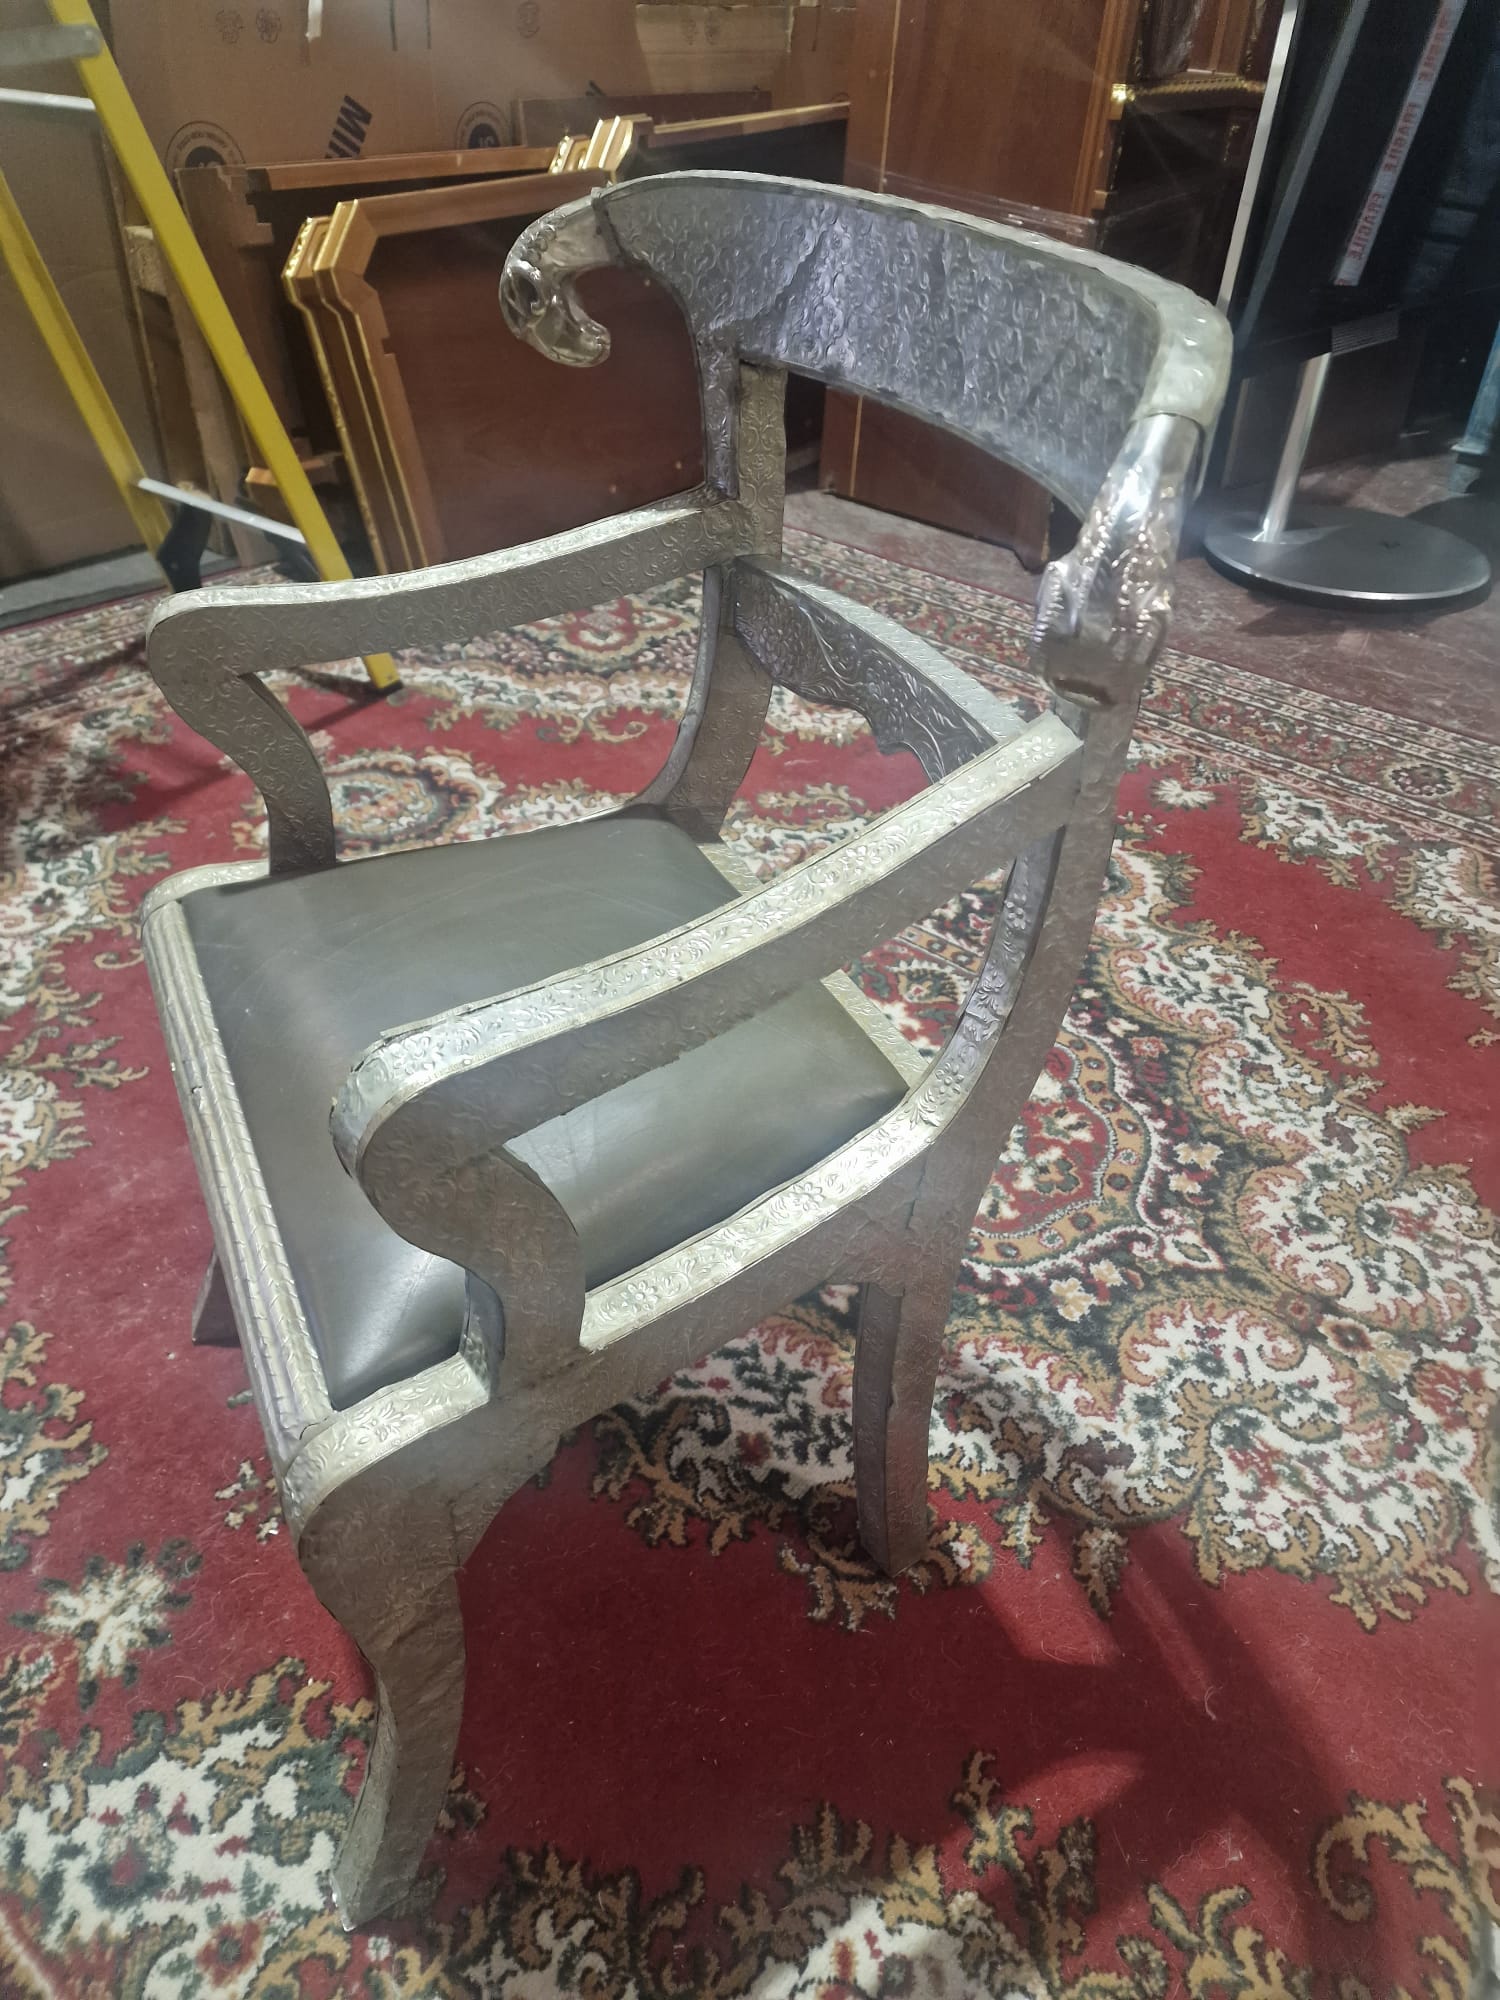 Dowry Chair And Footstool A Striking Vintage Anglo-Indian Silvered Metal-Clad Chair, 20th Century, - Image 11 of 16